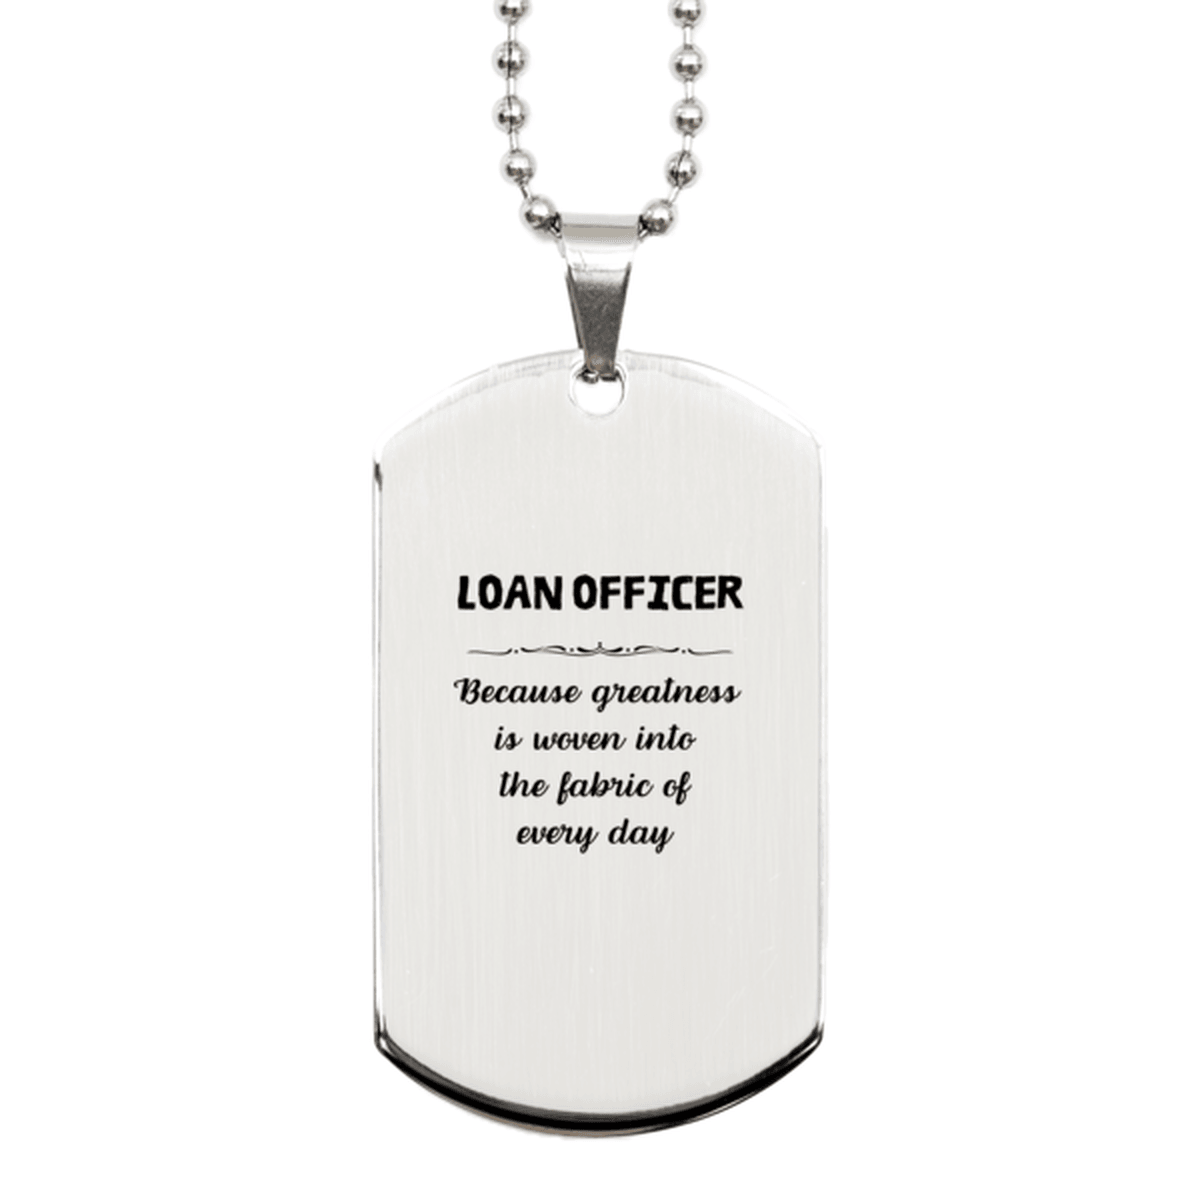 Sarcastic Loan Officer Silver Dog Tag Gifts, Christmas Holiday Gifts for Loan Officer Birthday, Loan Officer: Because greatness is woven into the fabric of every day, Coworkers, Friends - Mallard Moon Gift Shop